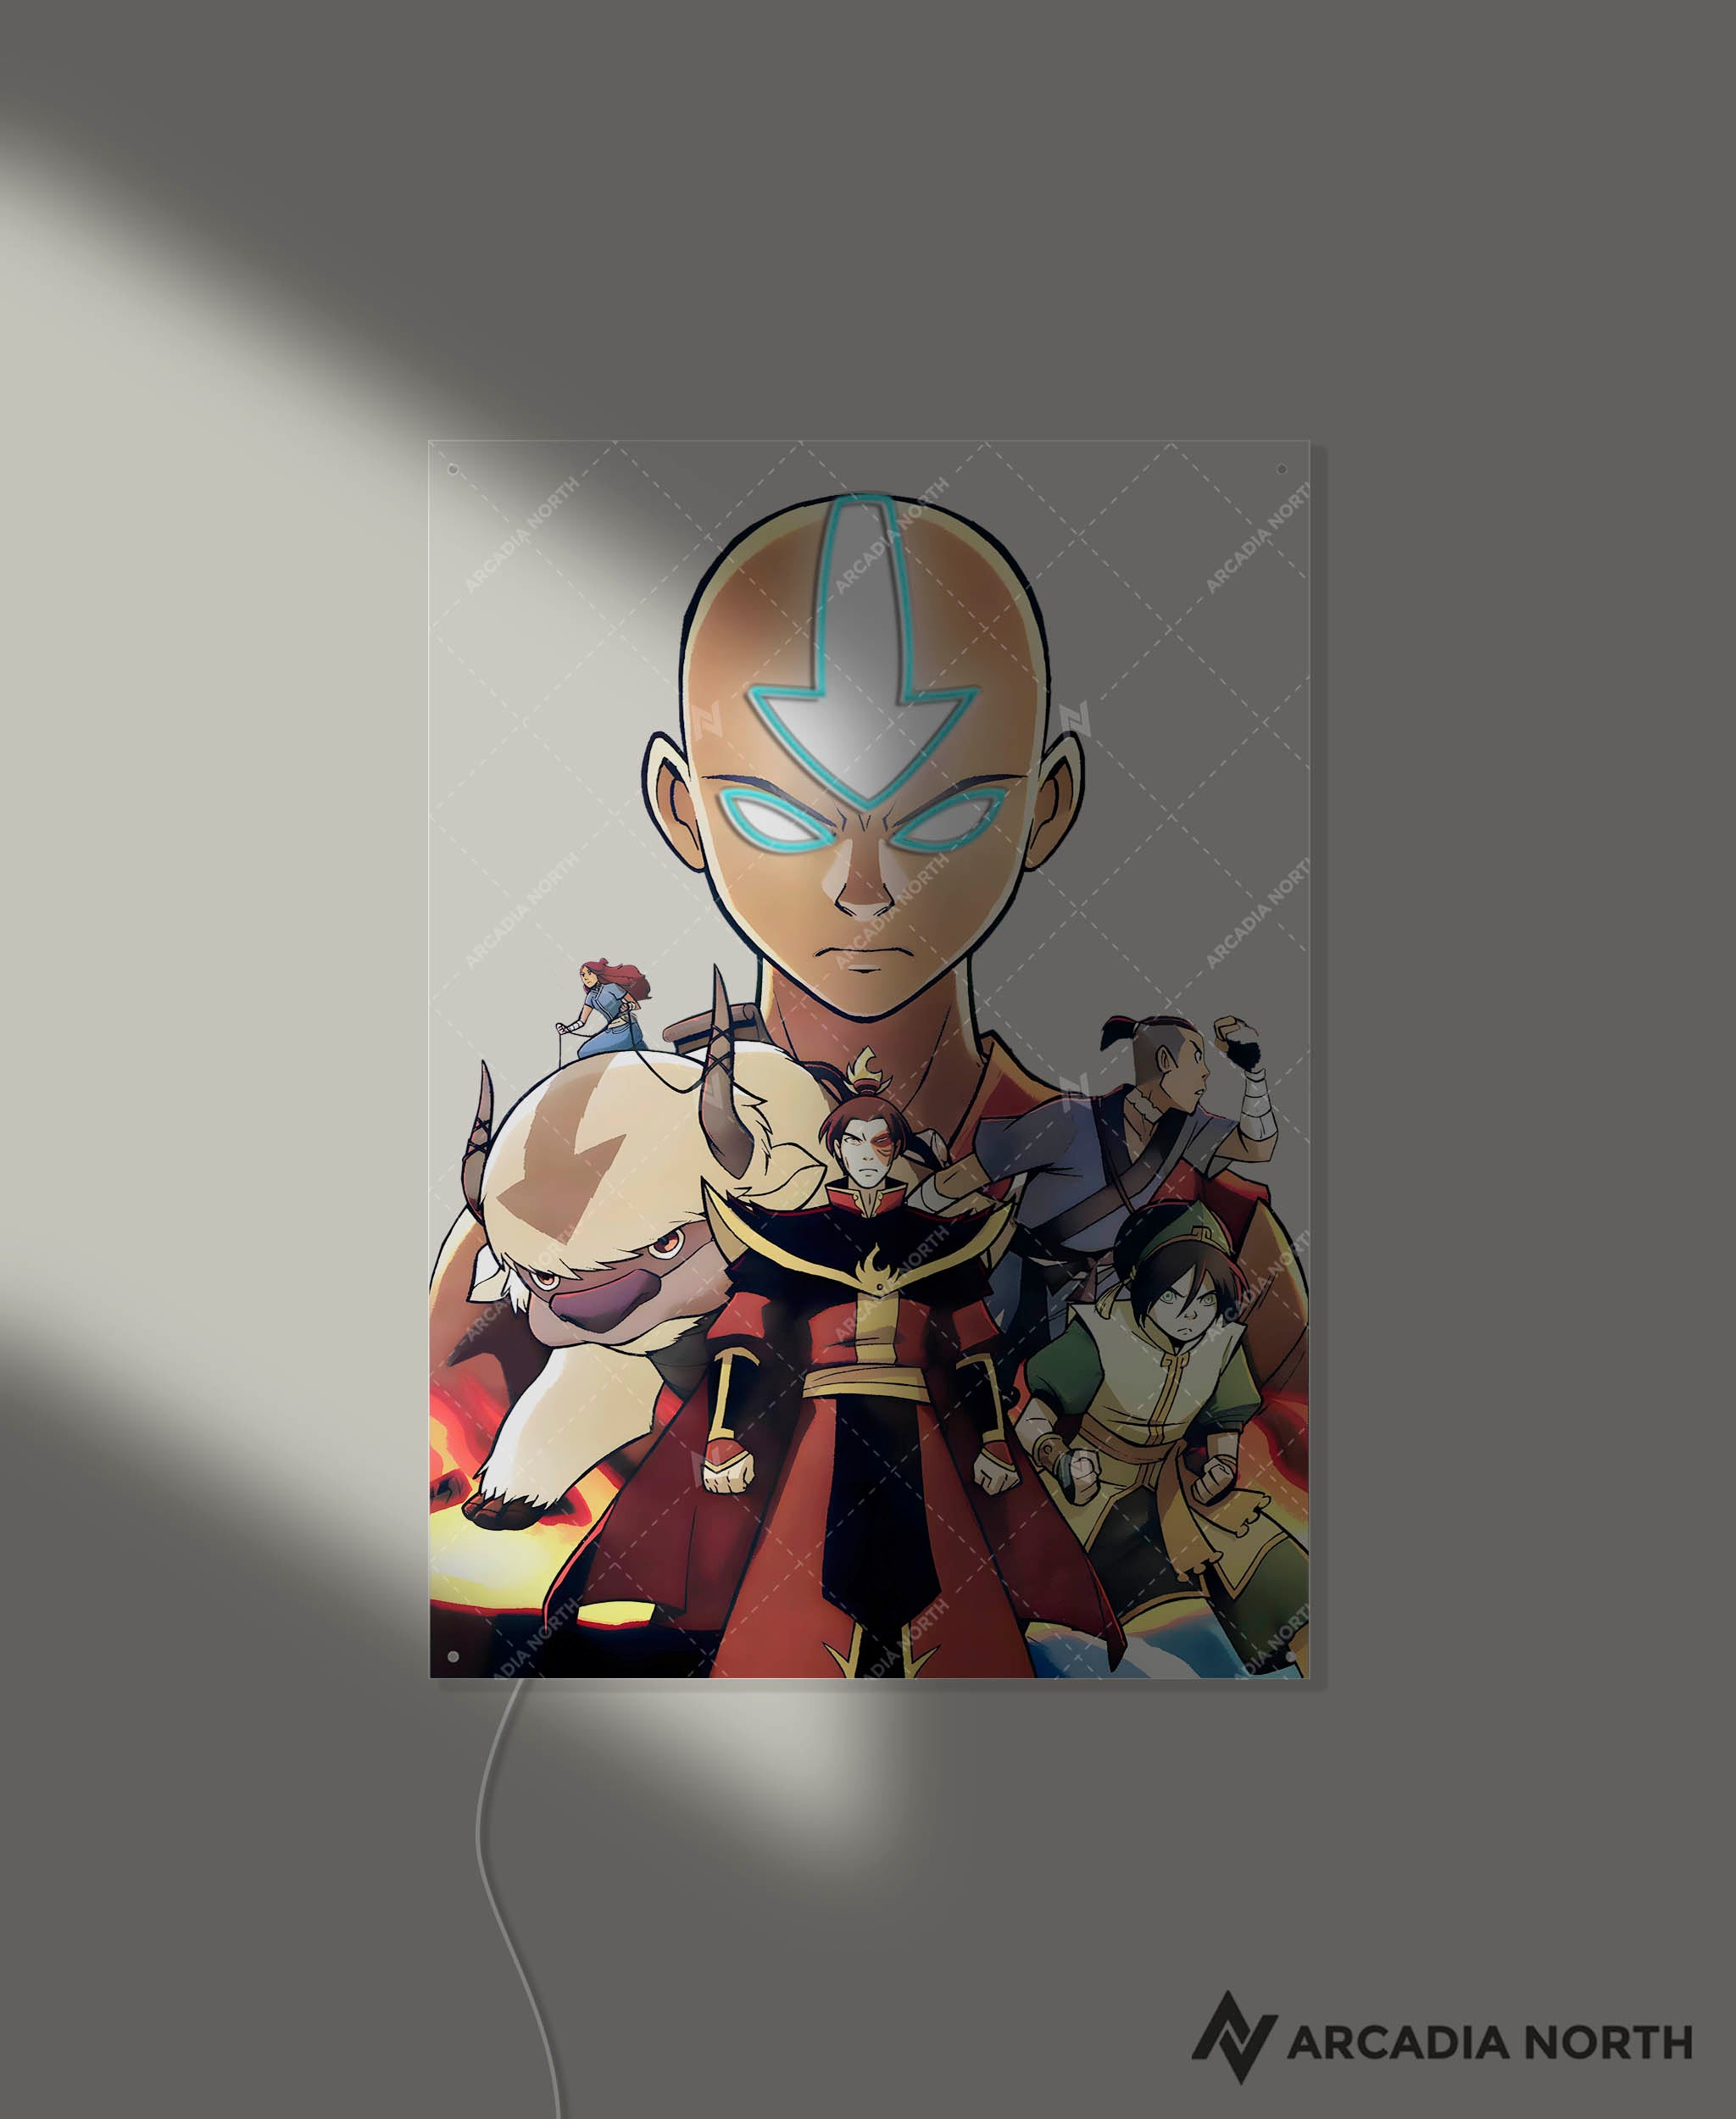 Arcadia North AURALIGHT - an LED Poster featuring the anime Avatar The Last Airbender with Aang, Zuko, Appa, Sokka, Katara, and Toph. Aang and his arrow tattoo are Illuminated by glowing LED neon lights like The Avatar State. UV-printed poster on acrylic.